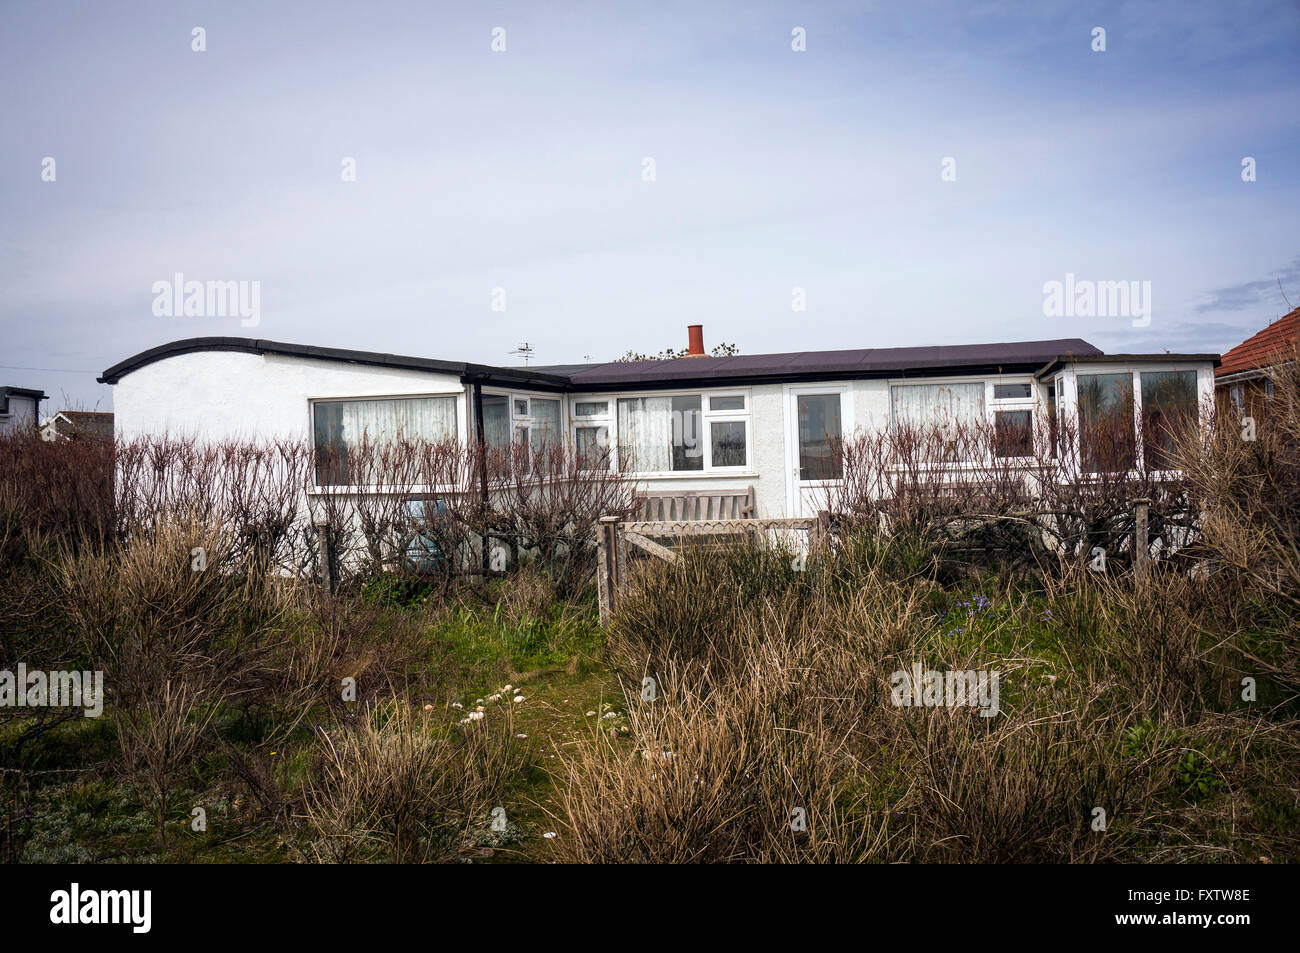 Railway carriage house on Pagham Beach near Chichester, West Sussex, UK Stock Photo